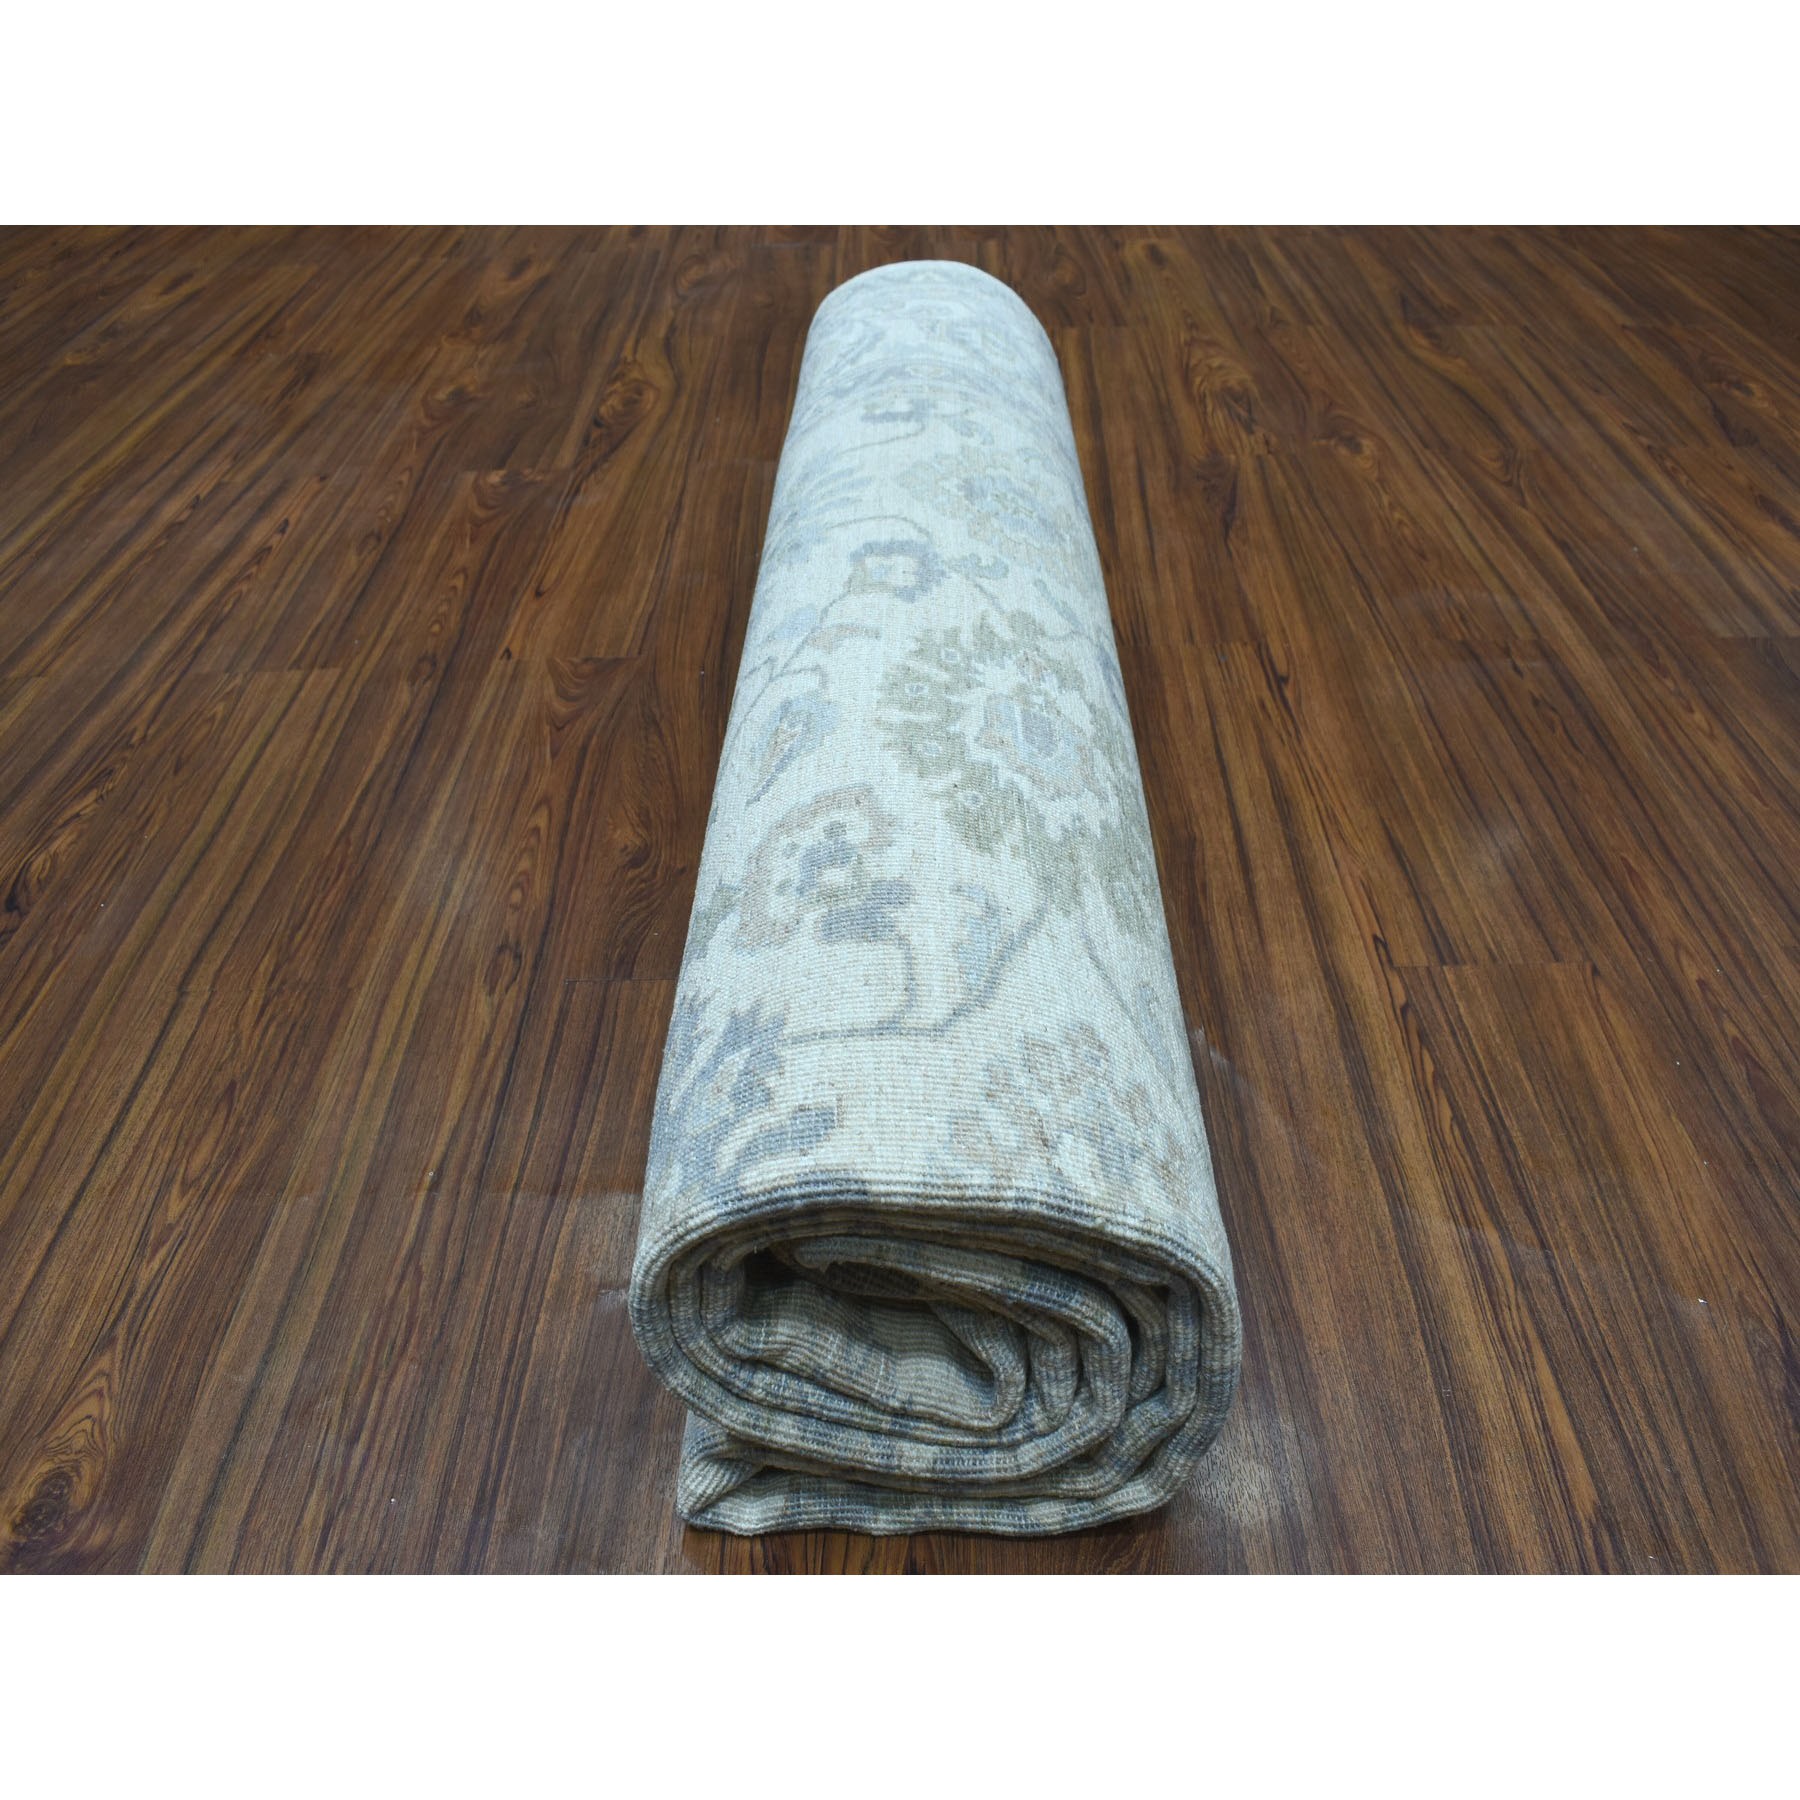 8-1 x9-10  White Wash Peshawar Pure Wool Hand Knotted Oriental Rug 